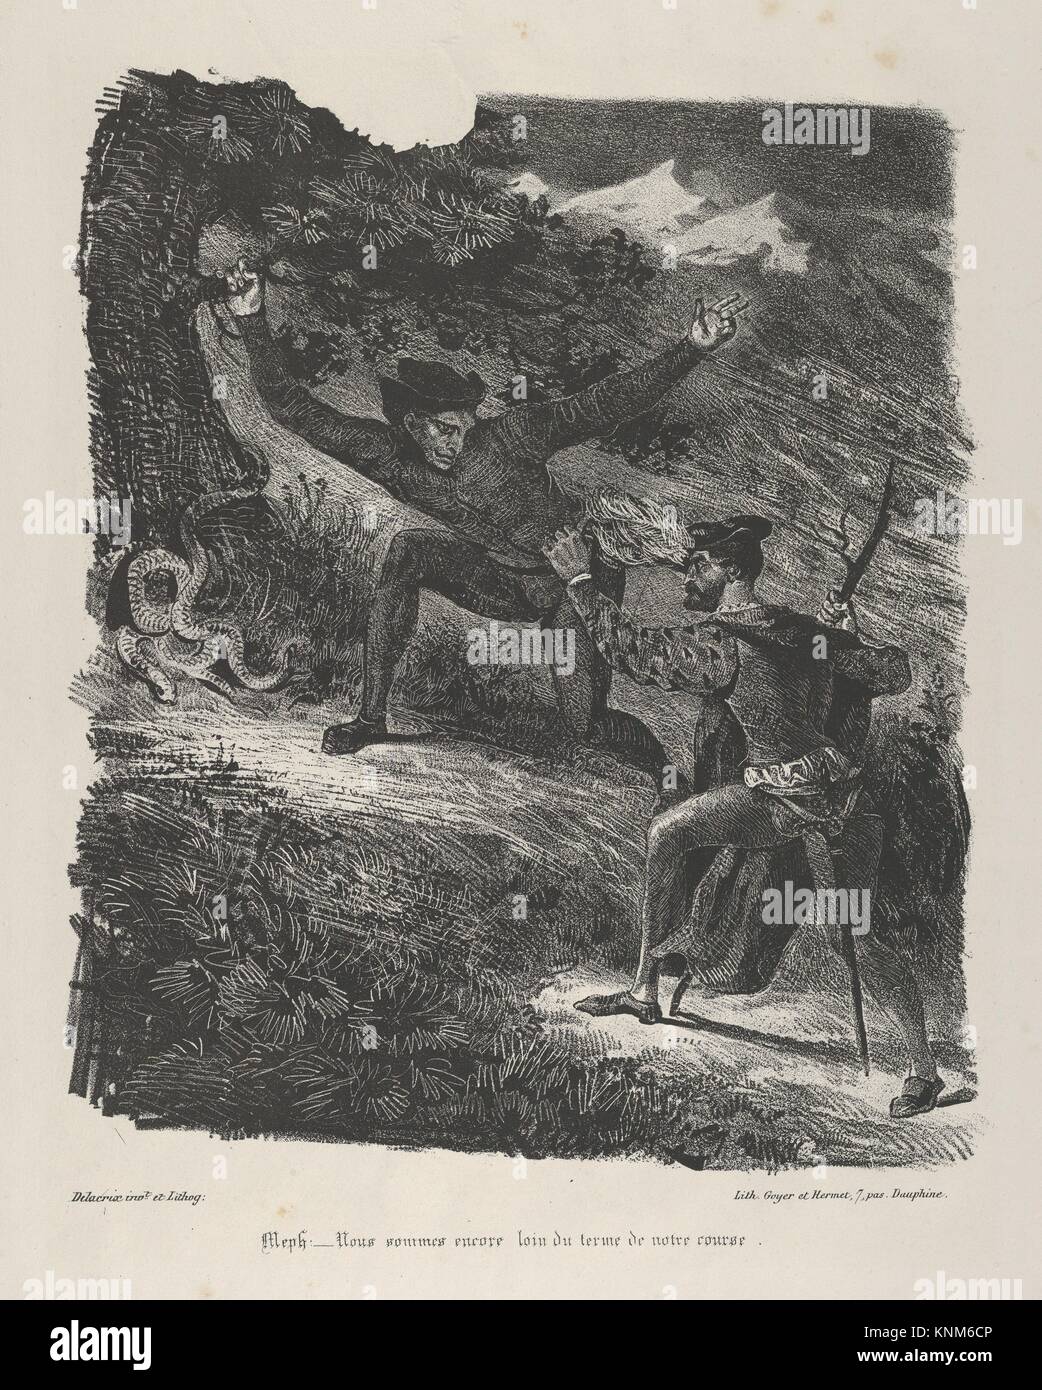 Faust and Mephistopheles in the Hartz Mountains (Goethe, Faust). Series/Portfolio: Faust; Artist: Eugène Delacroix (French, Charenton-Saint-Maurice Stock Photo